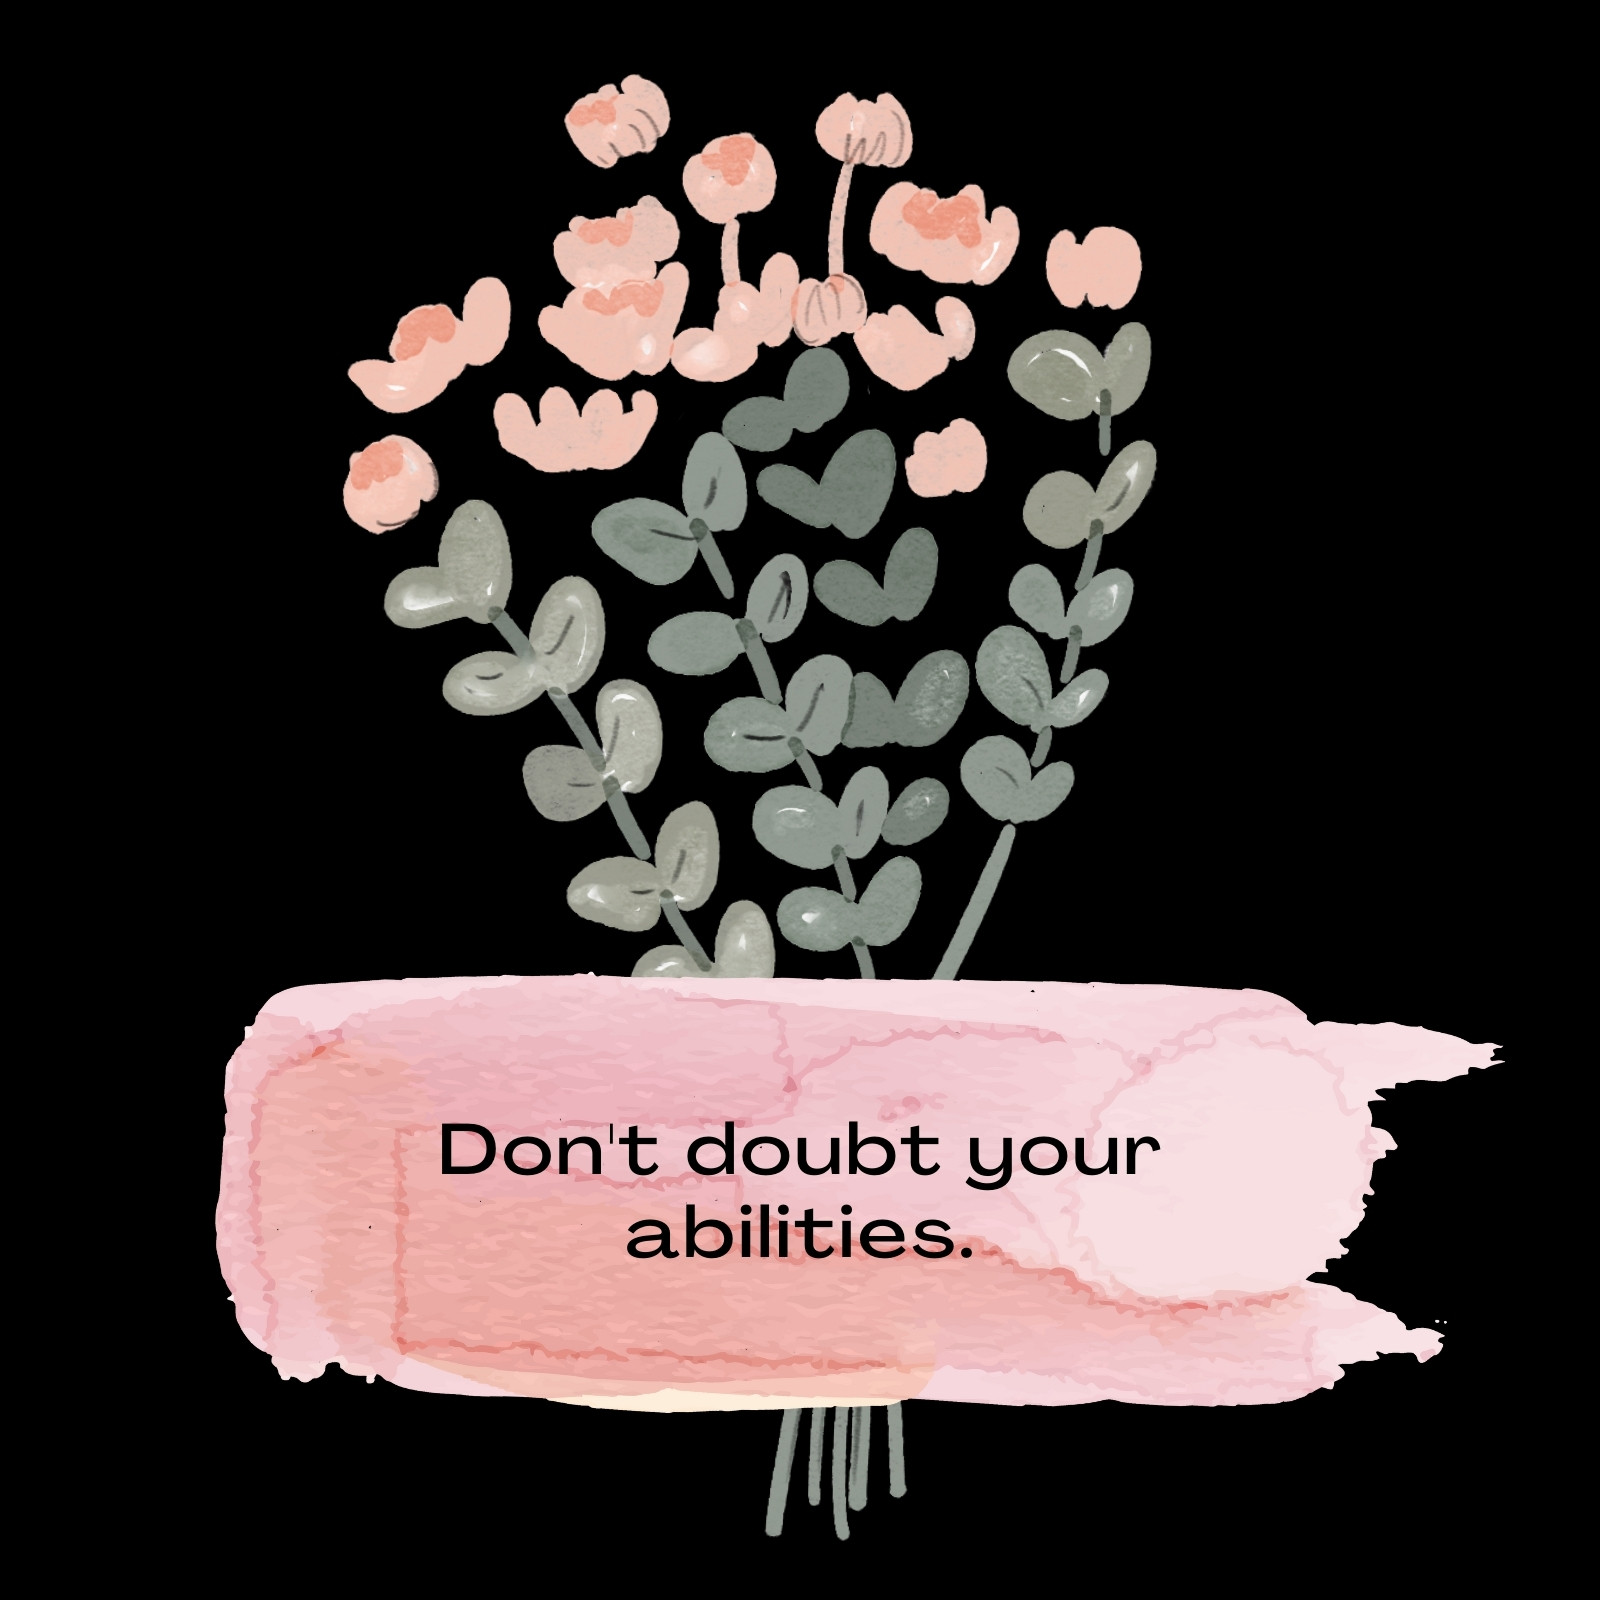 https://marketplace.canva.com/EAE2obFHHnA/1/0/1600w/canva-black-and-pink-watercolor-flower-bouquet-motivational-quote-card-p-l2PiTmo3g.jpg